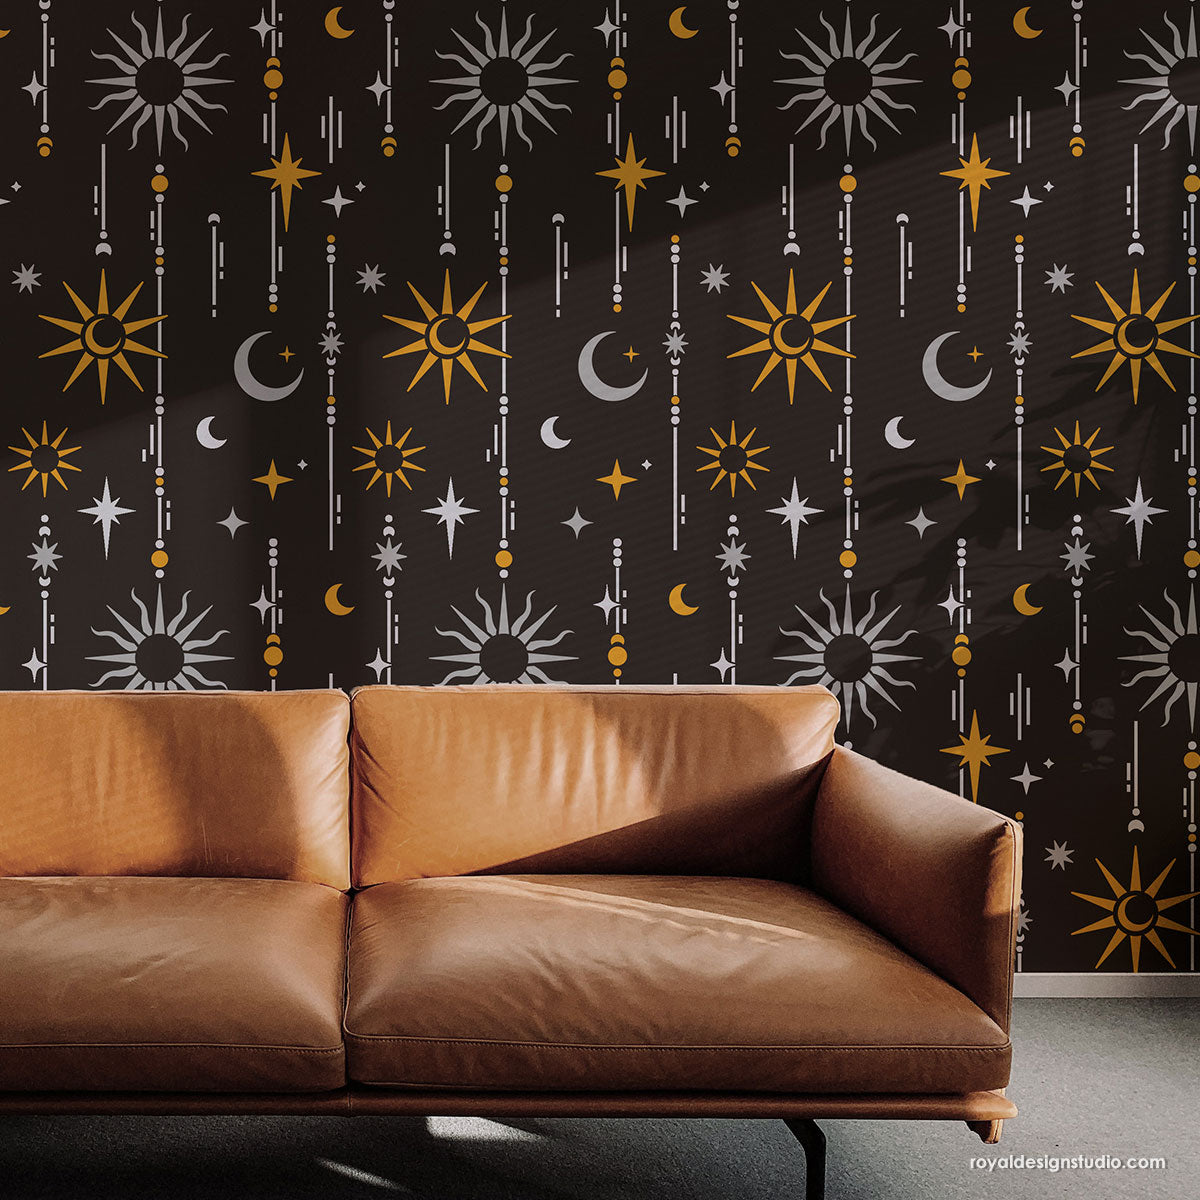 Celestial stencil-moon and stars wall  stenciling